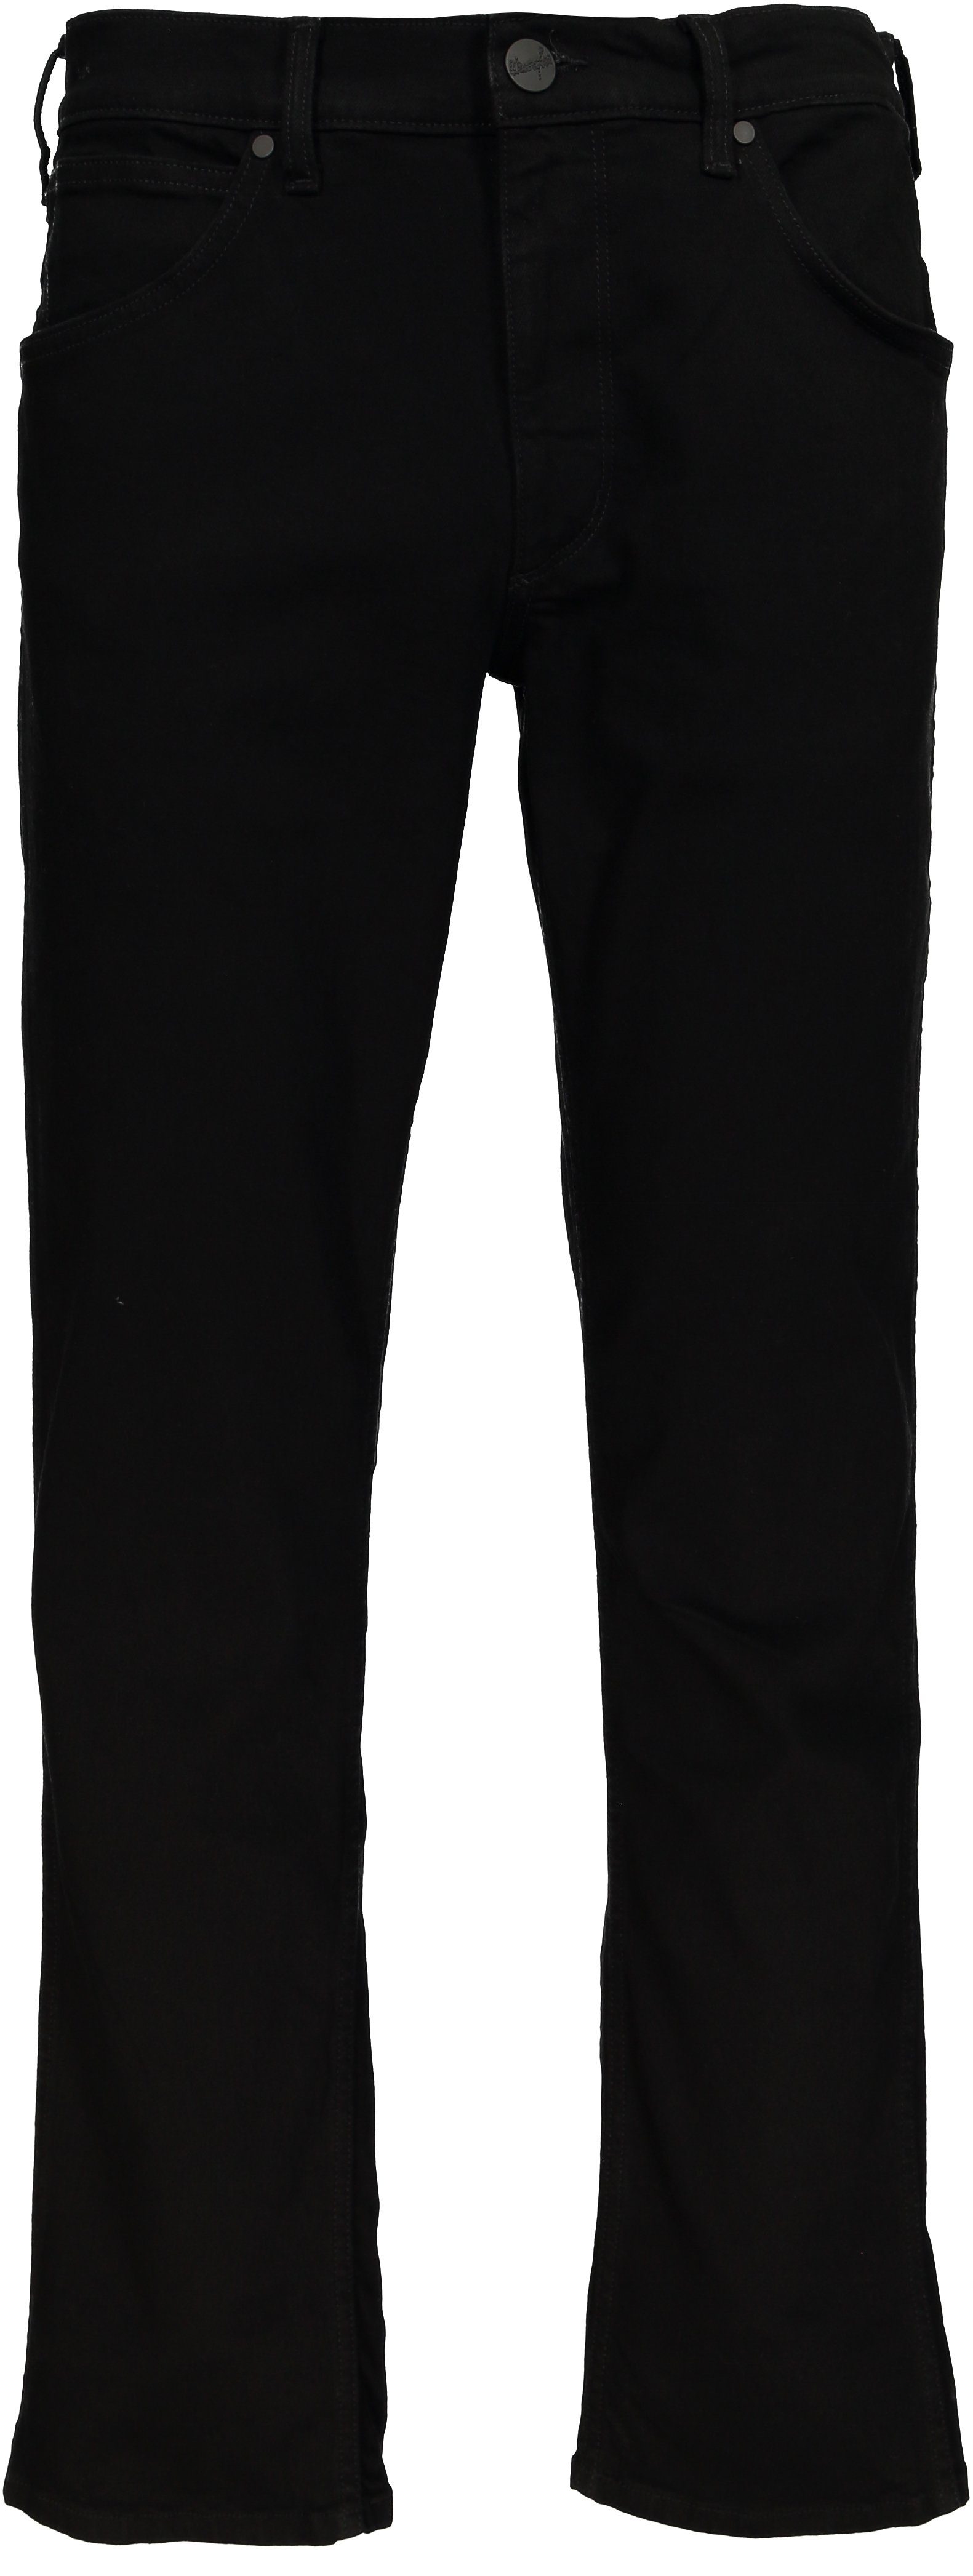 Wrangler 5-Pocket-Jeans WRANGLER GREENSBORO black valley W15QHP19A | Straight-Fit Jeans